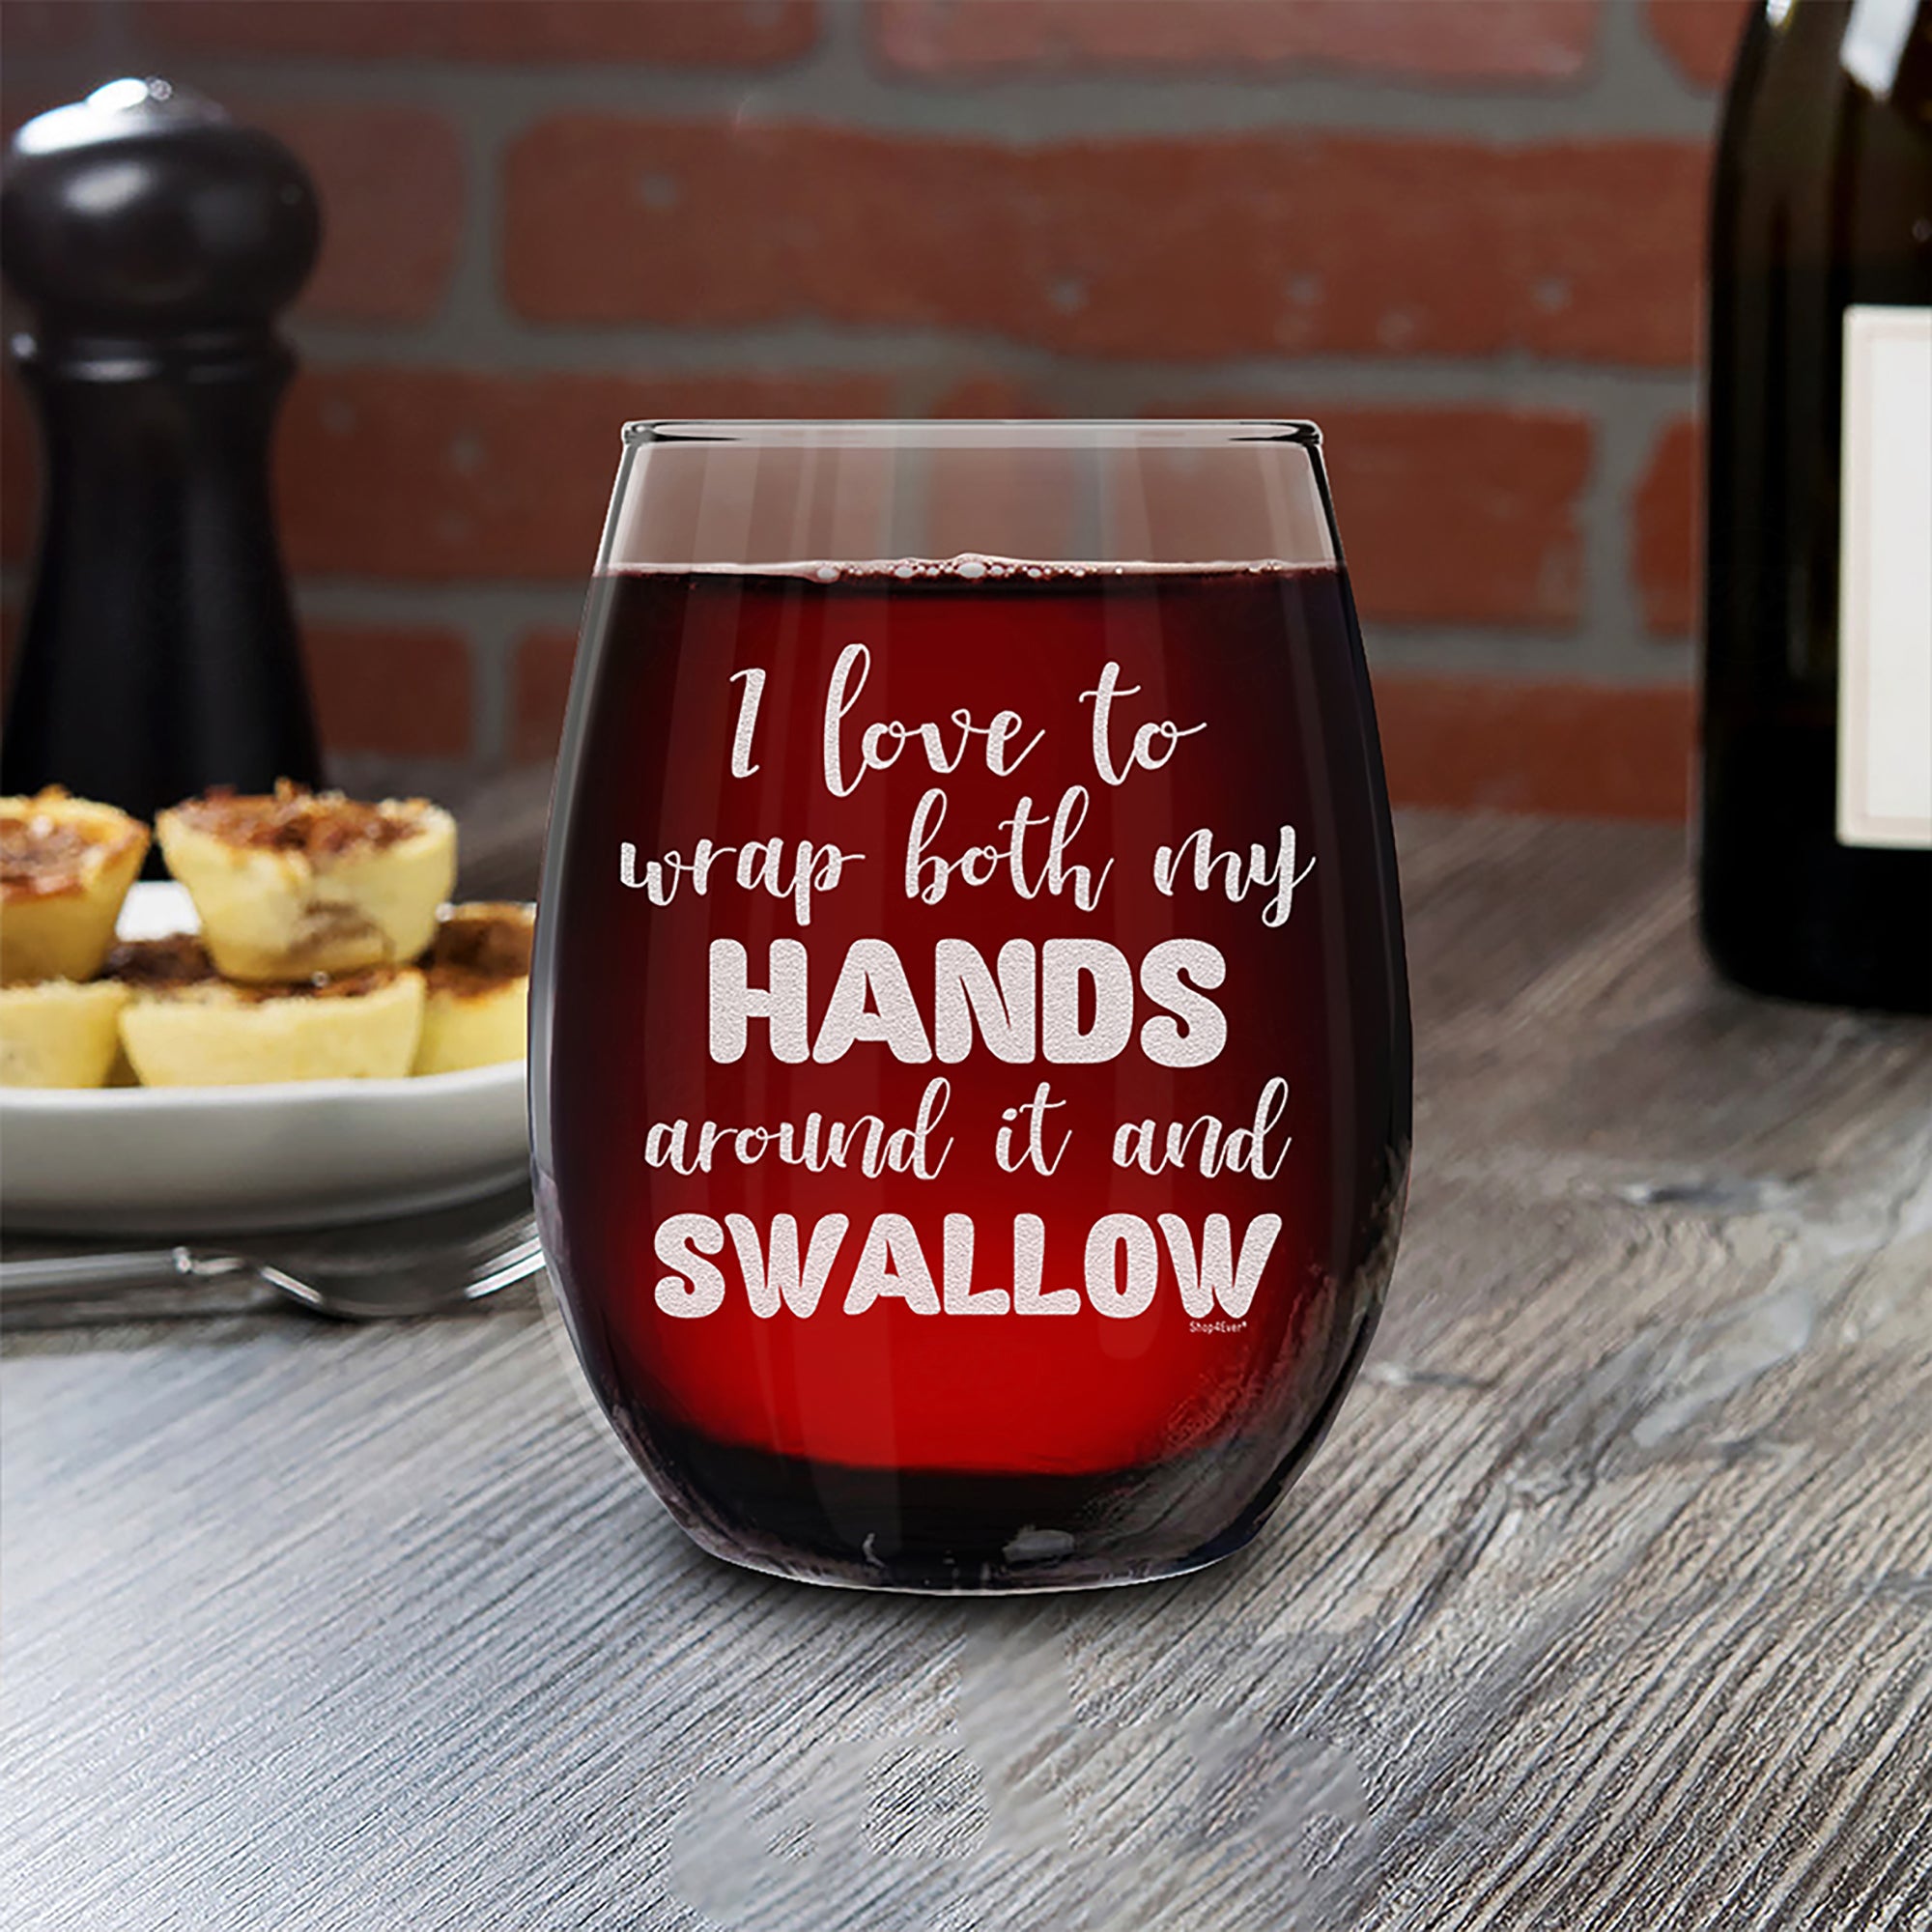 I Love To Wrap Both My Hands Around It And Swallow Engraved Stemless Wine Glass Funny Wine Glass Bachelorette Party